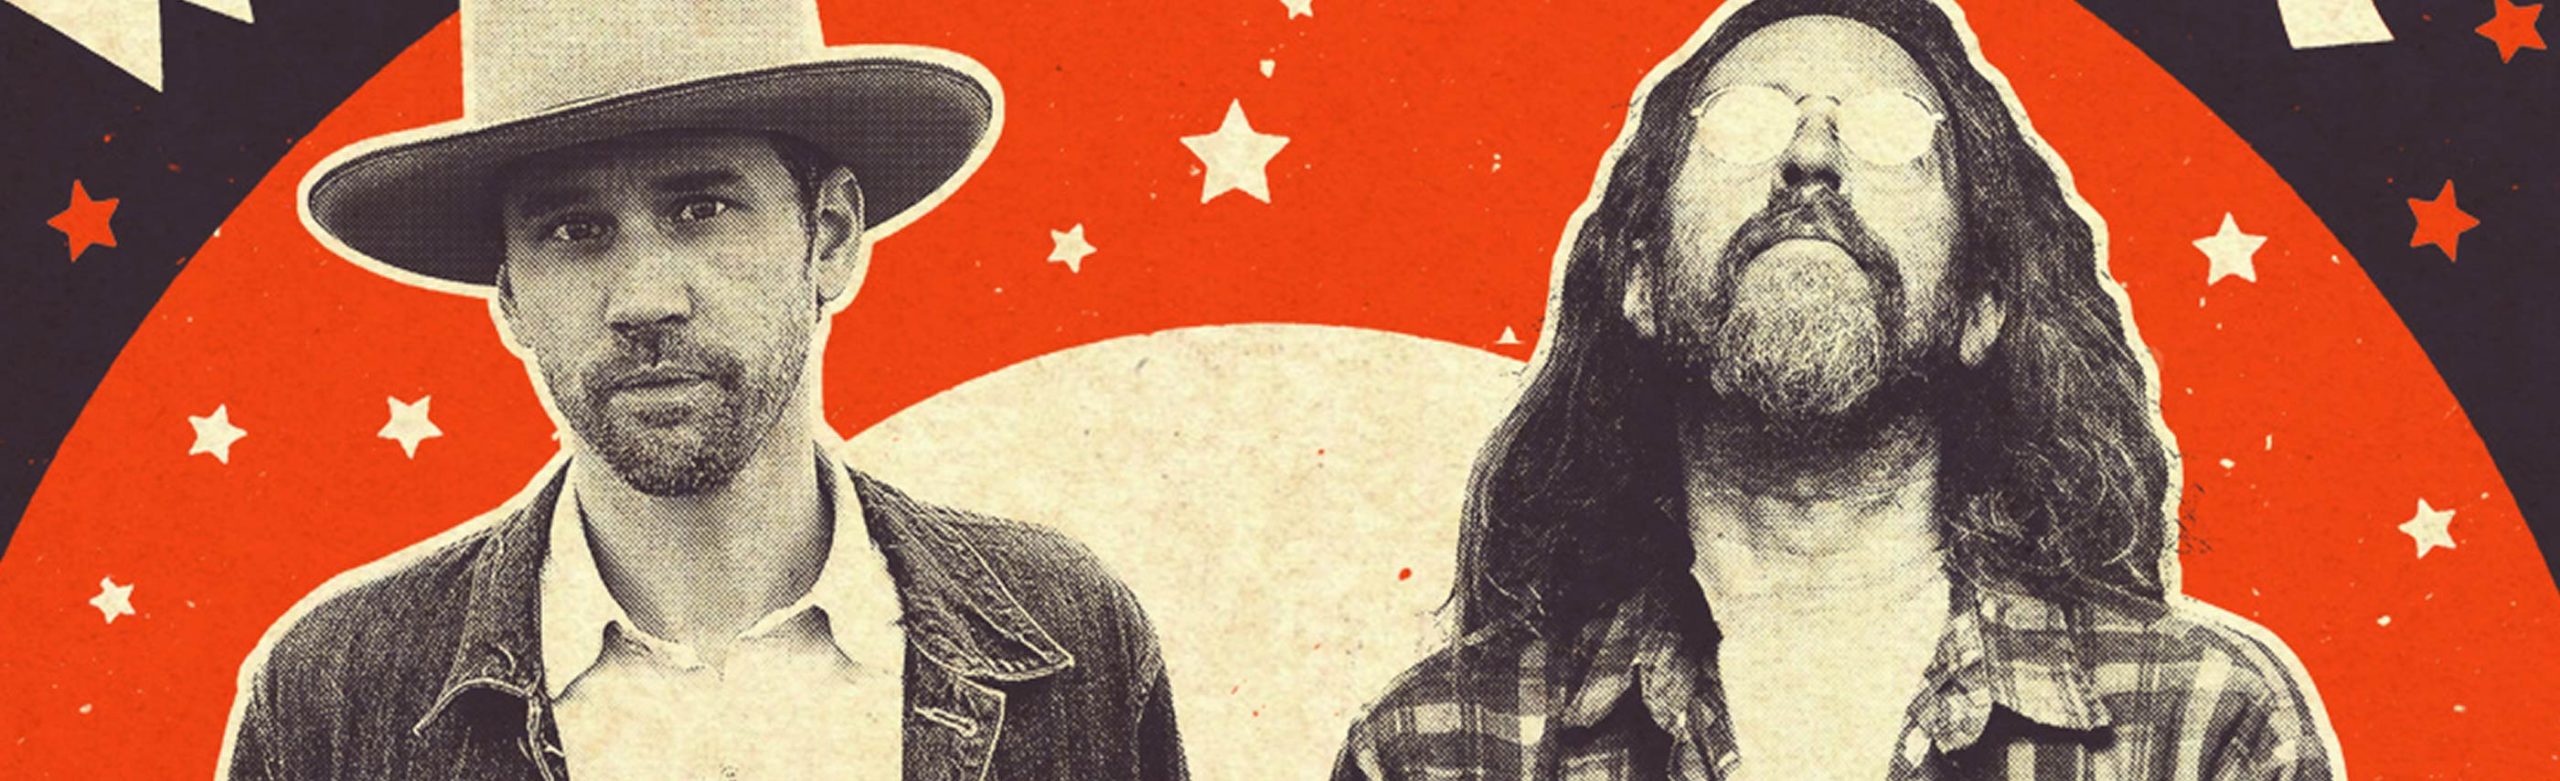 Fervent Folk: Charlie Parr and Willie Watson to Perform in Missoula Image